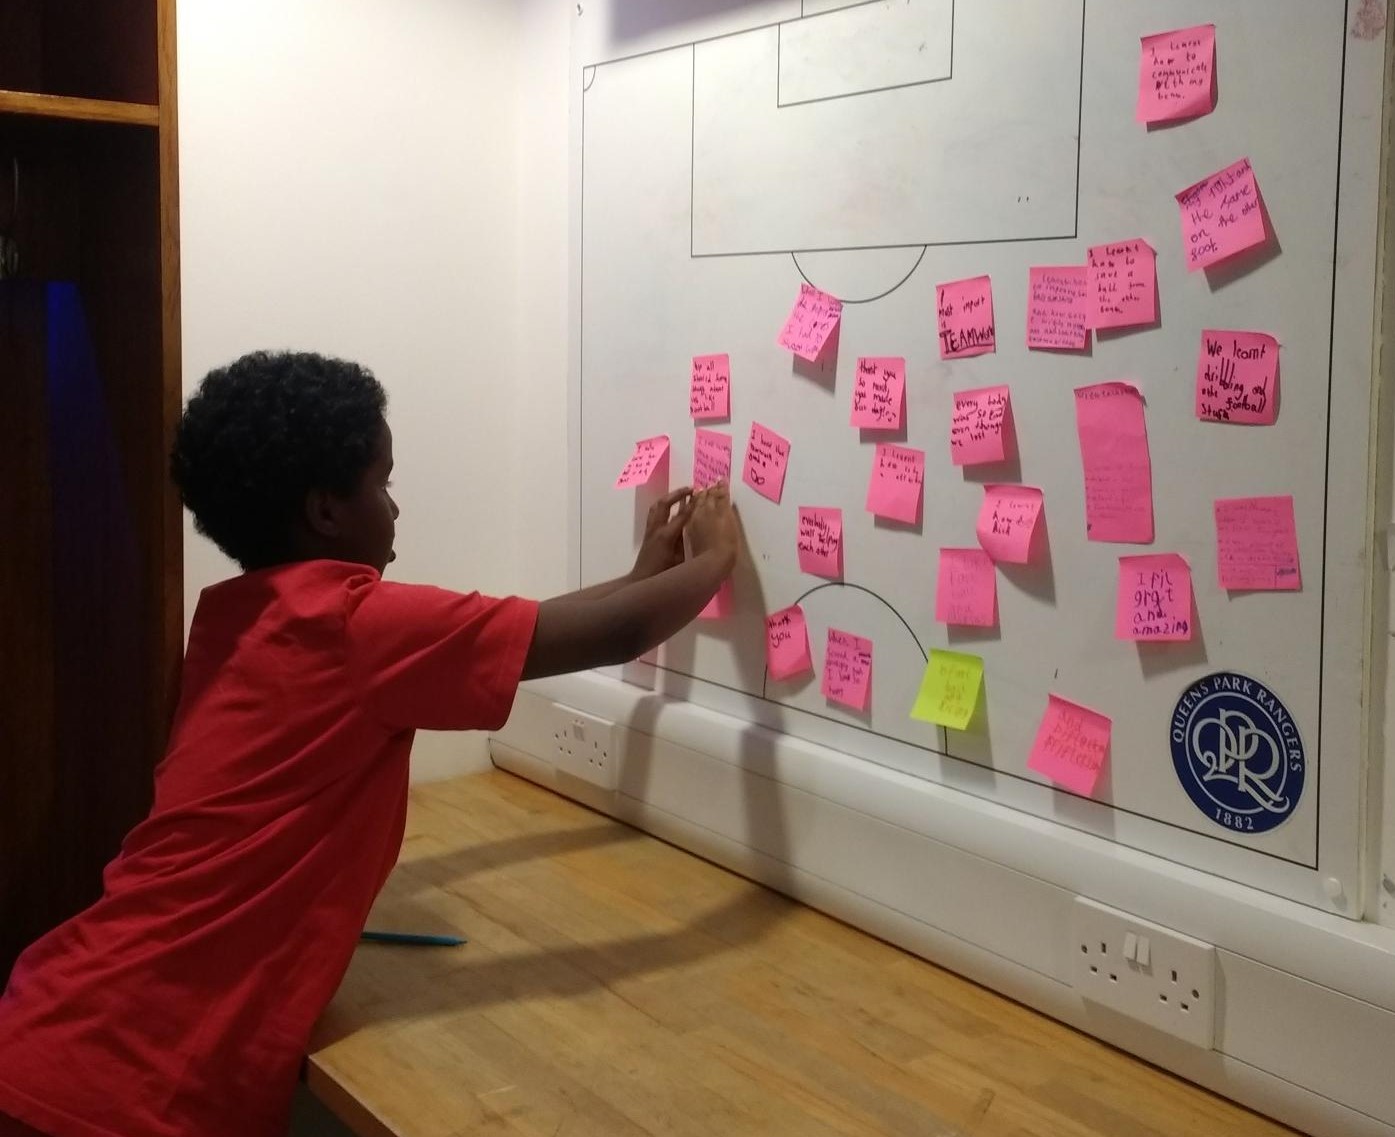 A boy puts a sticky note on a board in an exercise